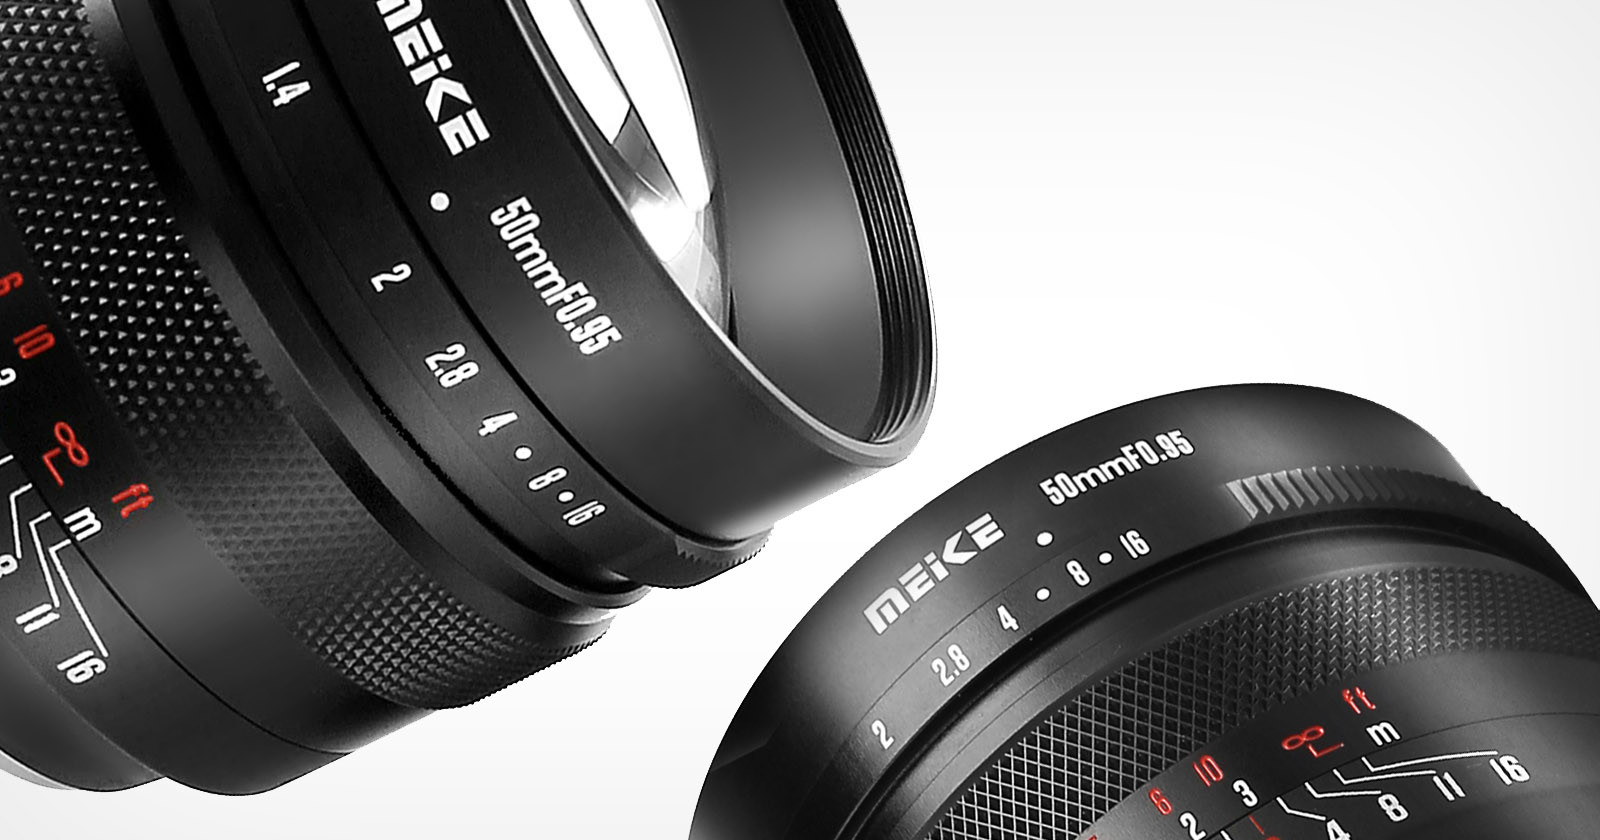 Meikes New 50mm f/0.95 APS-C Lens Costs Just $250